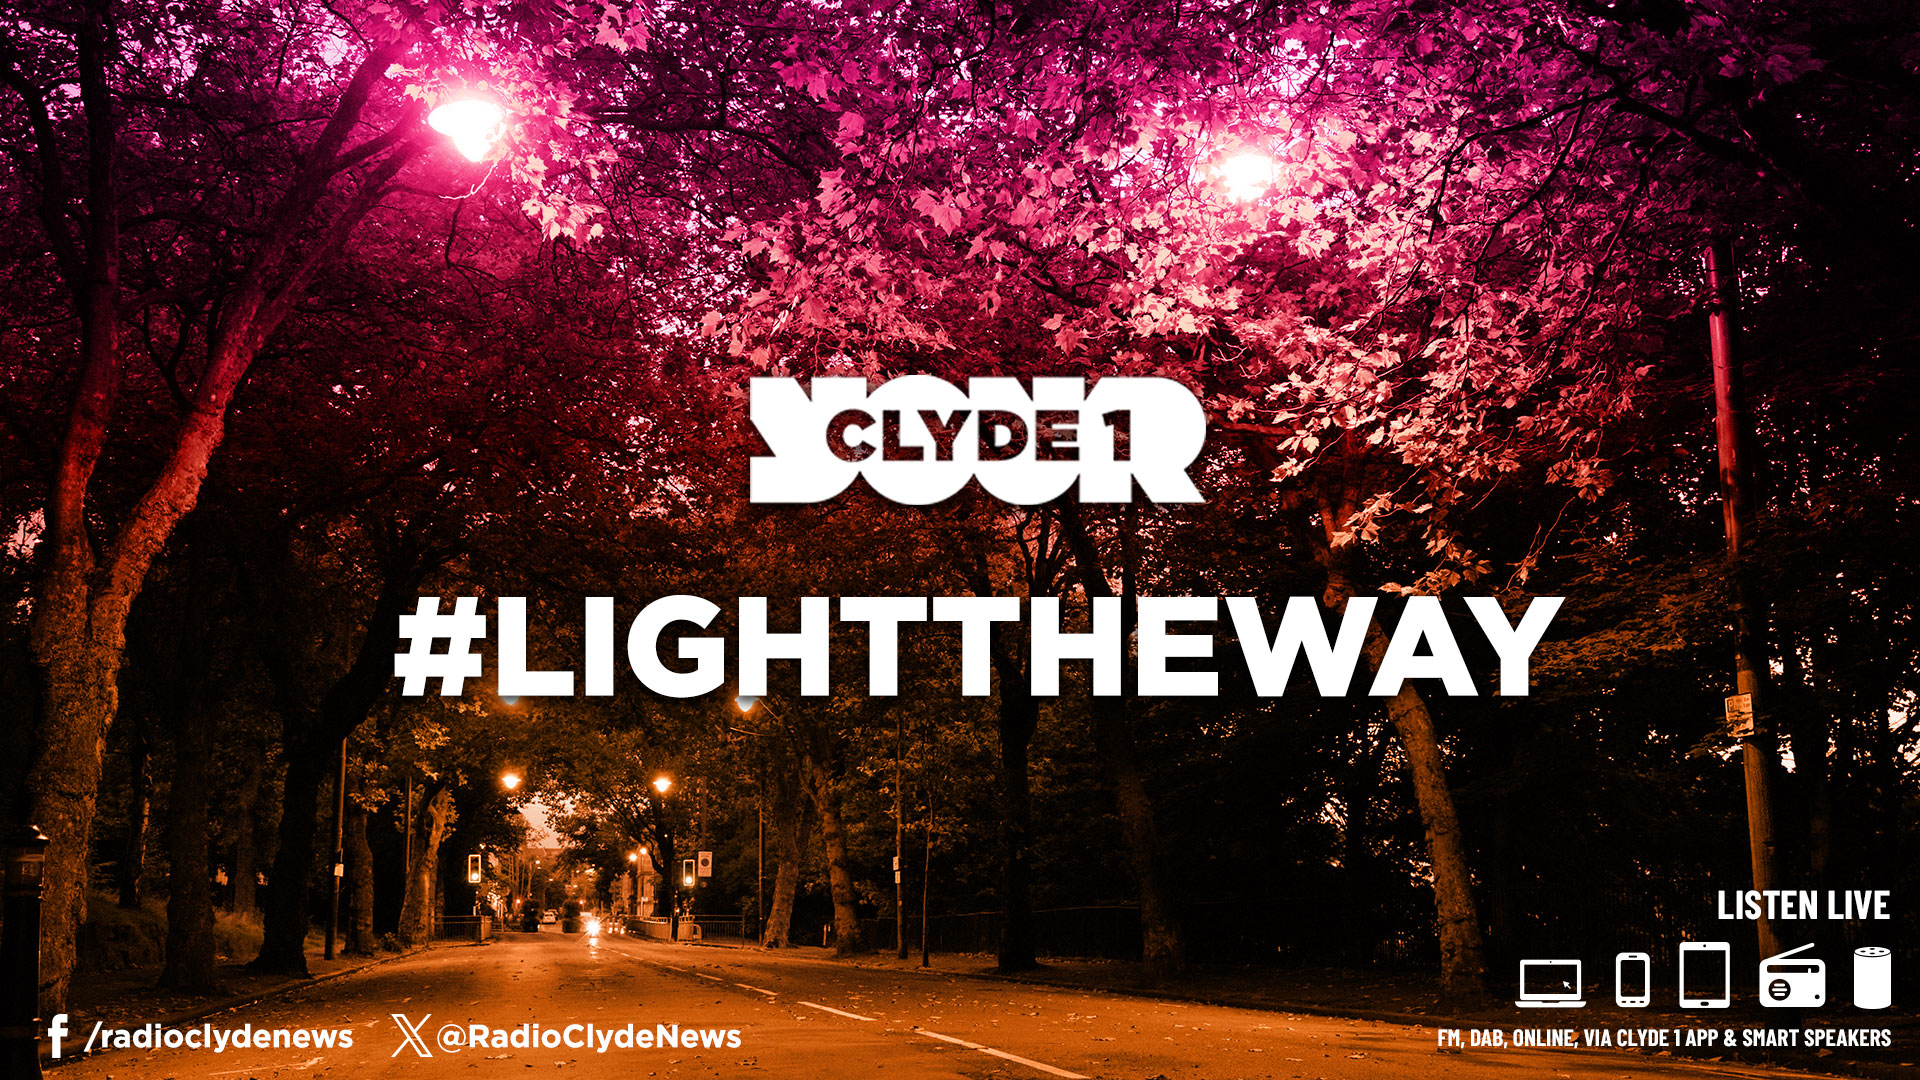 Clyde 1 Light the Way campaign promotion.